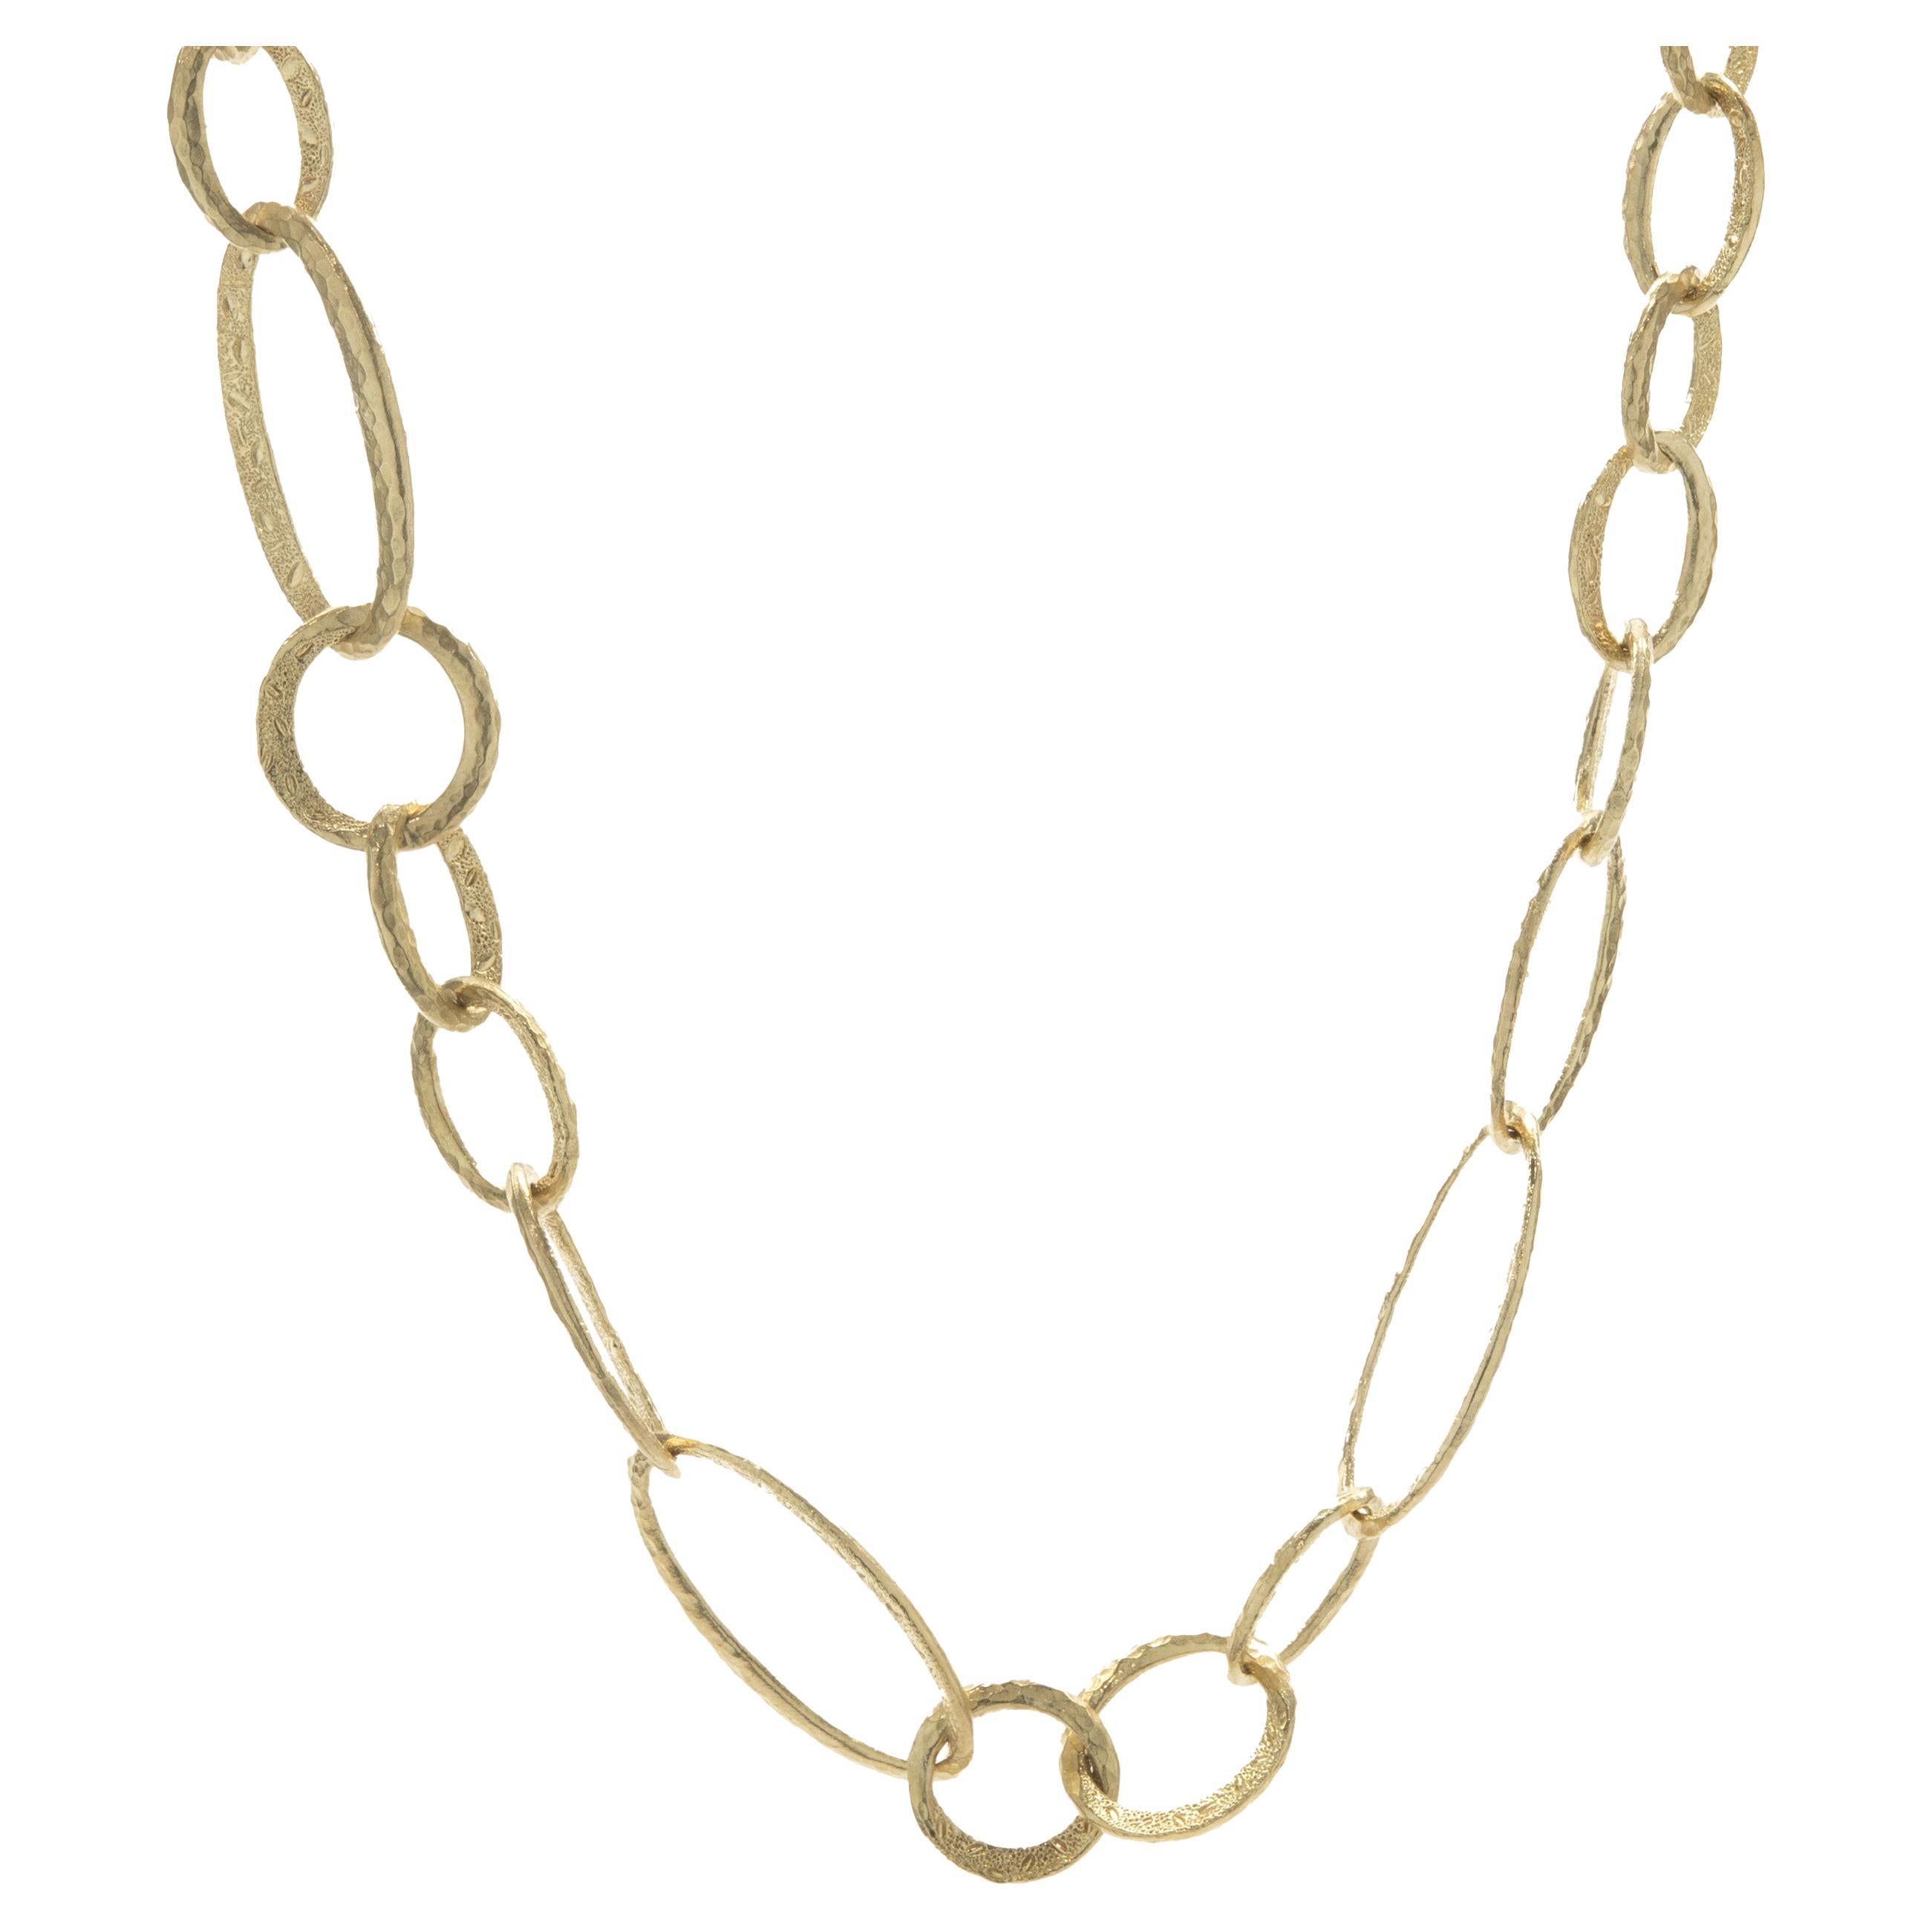 18 Karat Yellow Gold Italian Designed Hammered Open Circle Link Necklace